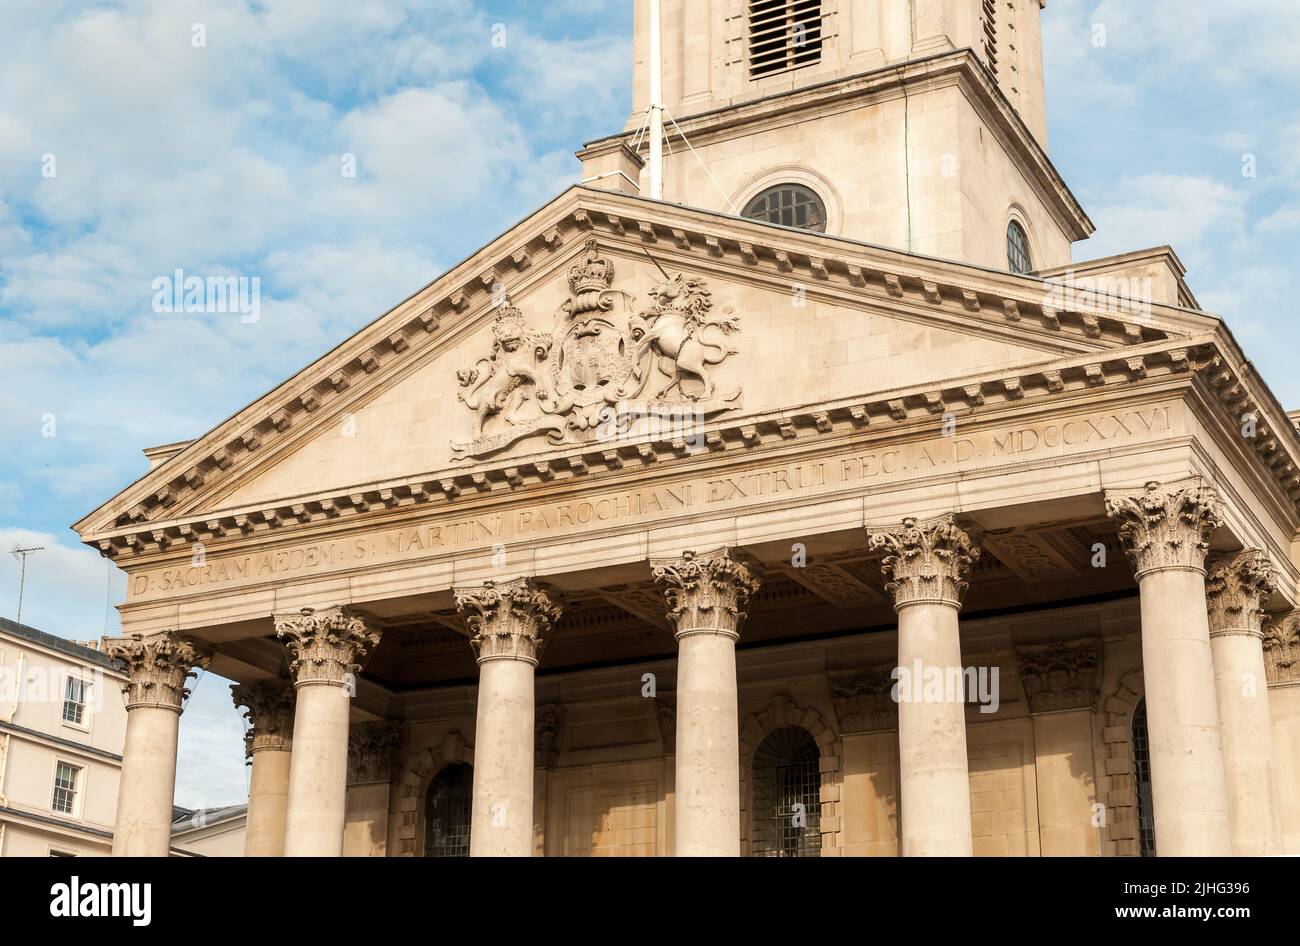 View of the Church of St Martin in the Fields in the Trafalgar Square in central London, United Kingdom Stock Photo